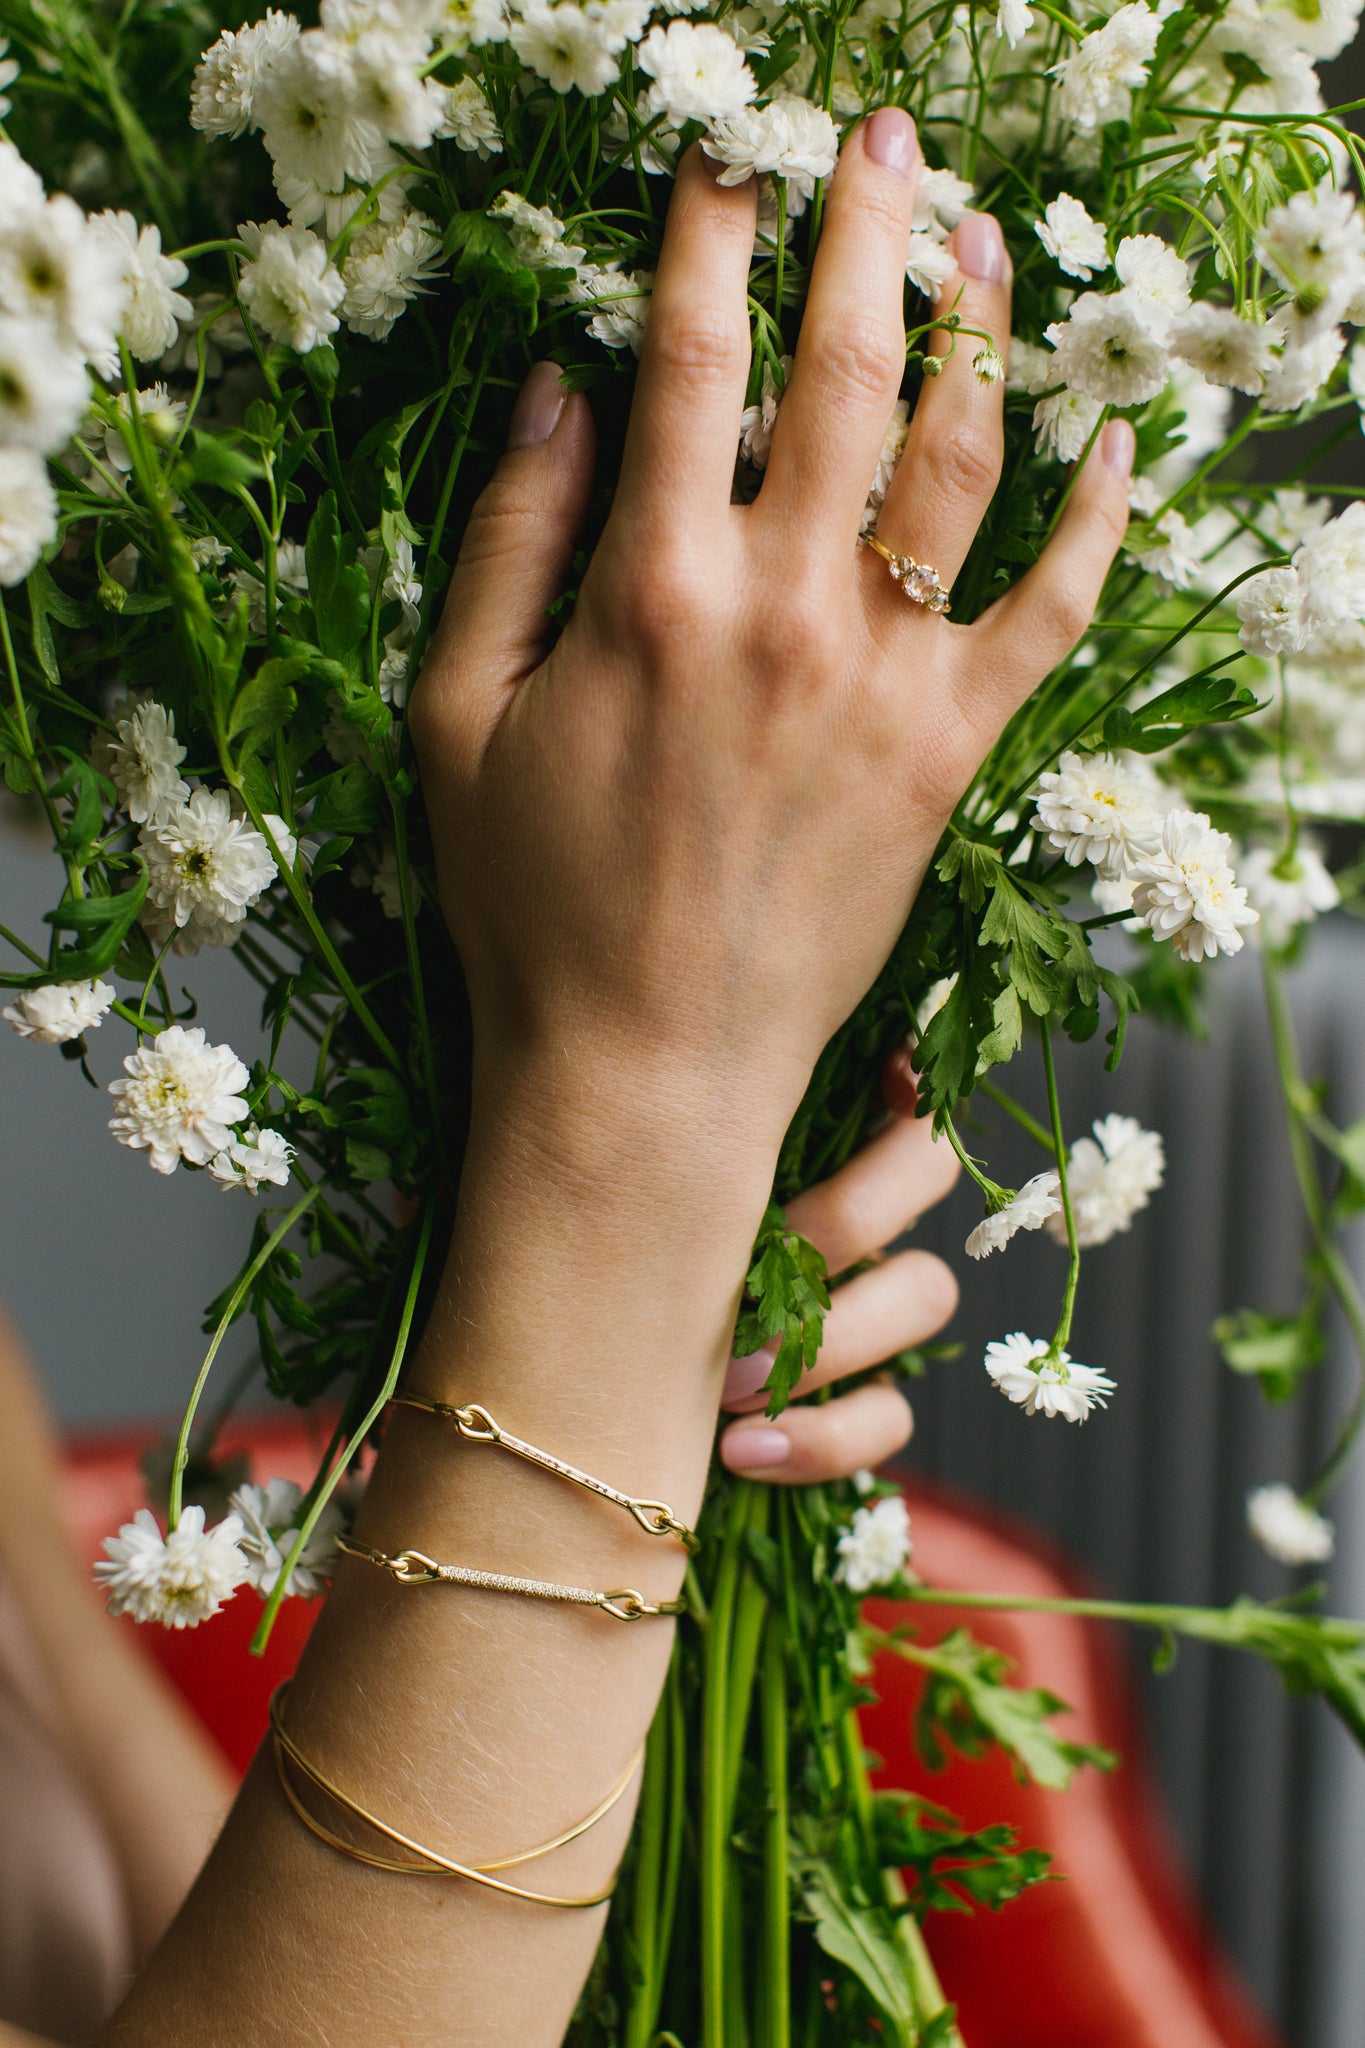 Needle eye cuffs and bangles with daisies.